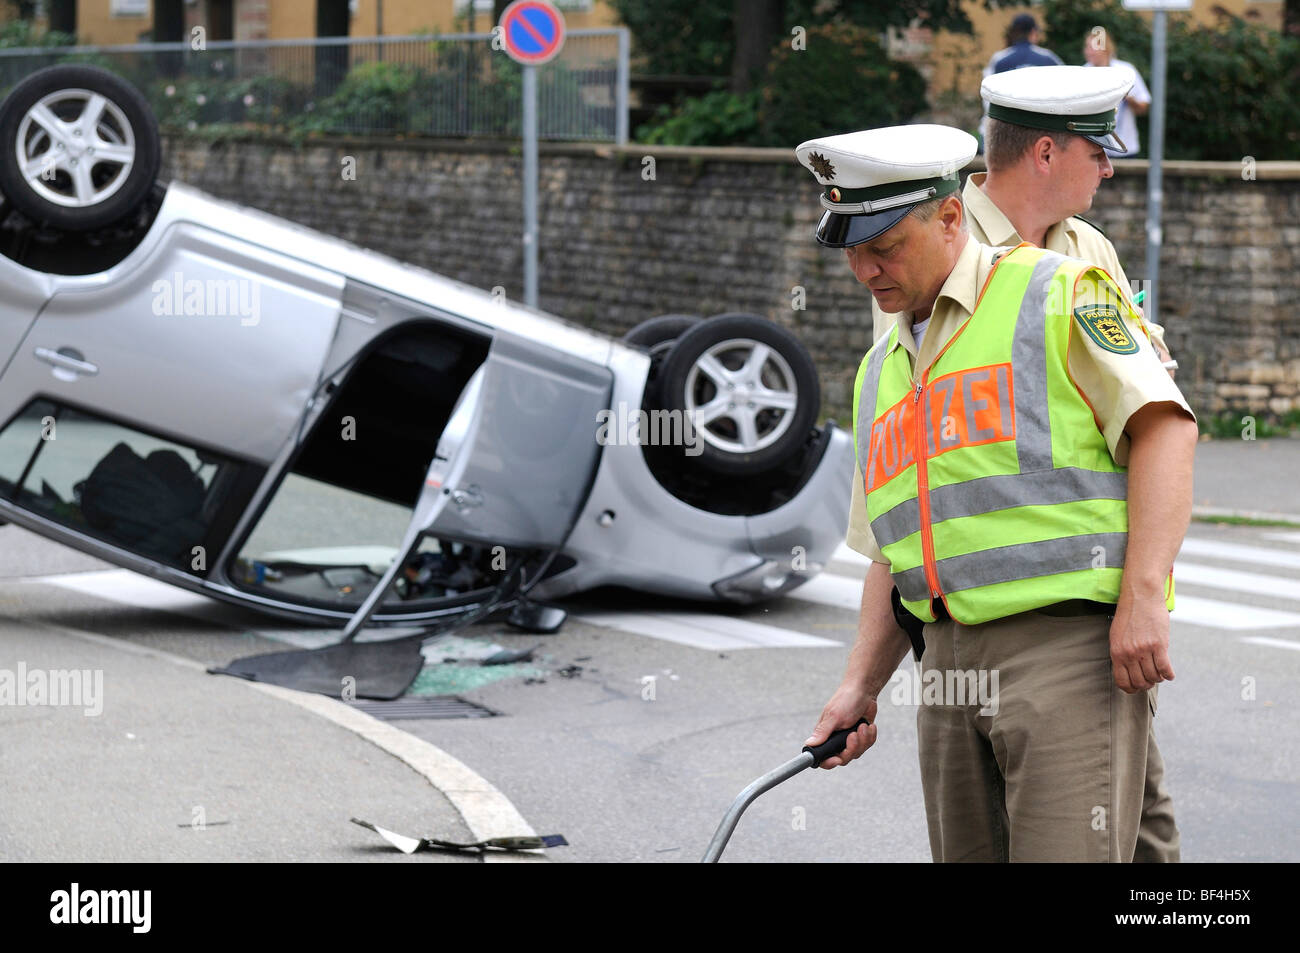 Daihatsu car having rolled over in a traffic accident, lying on its roof, police officer writing up the accident, surveying, St Stock Photo